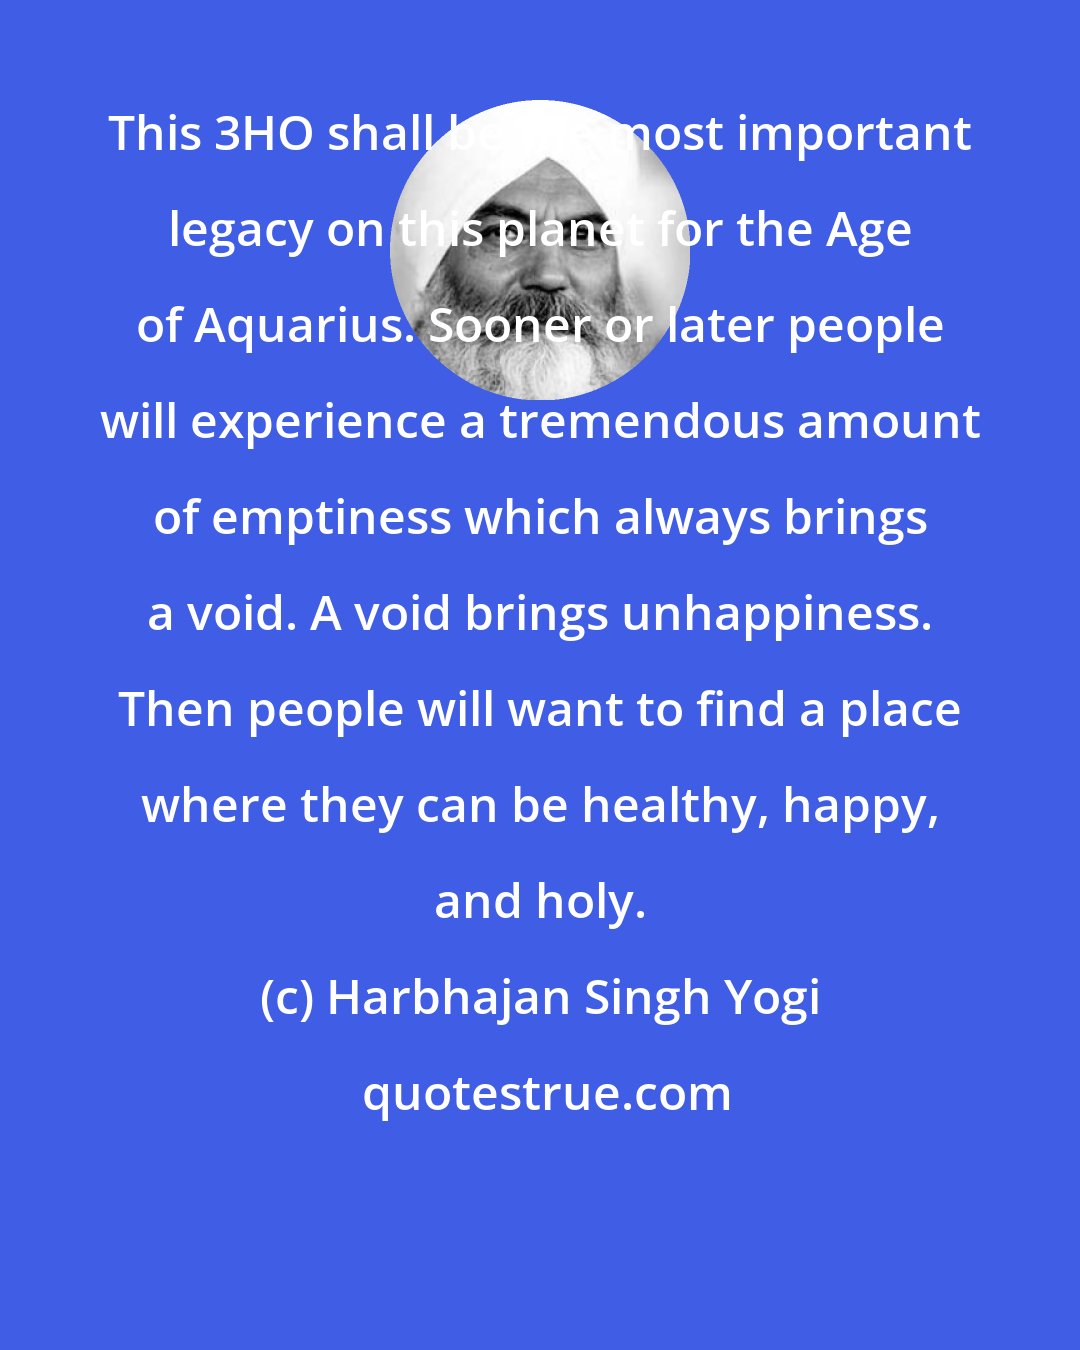 Harbhajan Singh Yogi: This 3HO shall be the most important legacy on this planet for the Age of Aquarius. Sooner or later people will experience a tremendous amount of emptiness which always brings a void. A void brings unhappiness. Then people will want to find a place where they can be healthy, happy, and holy.